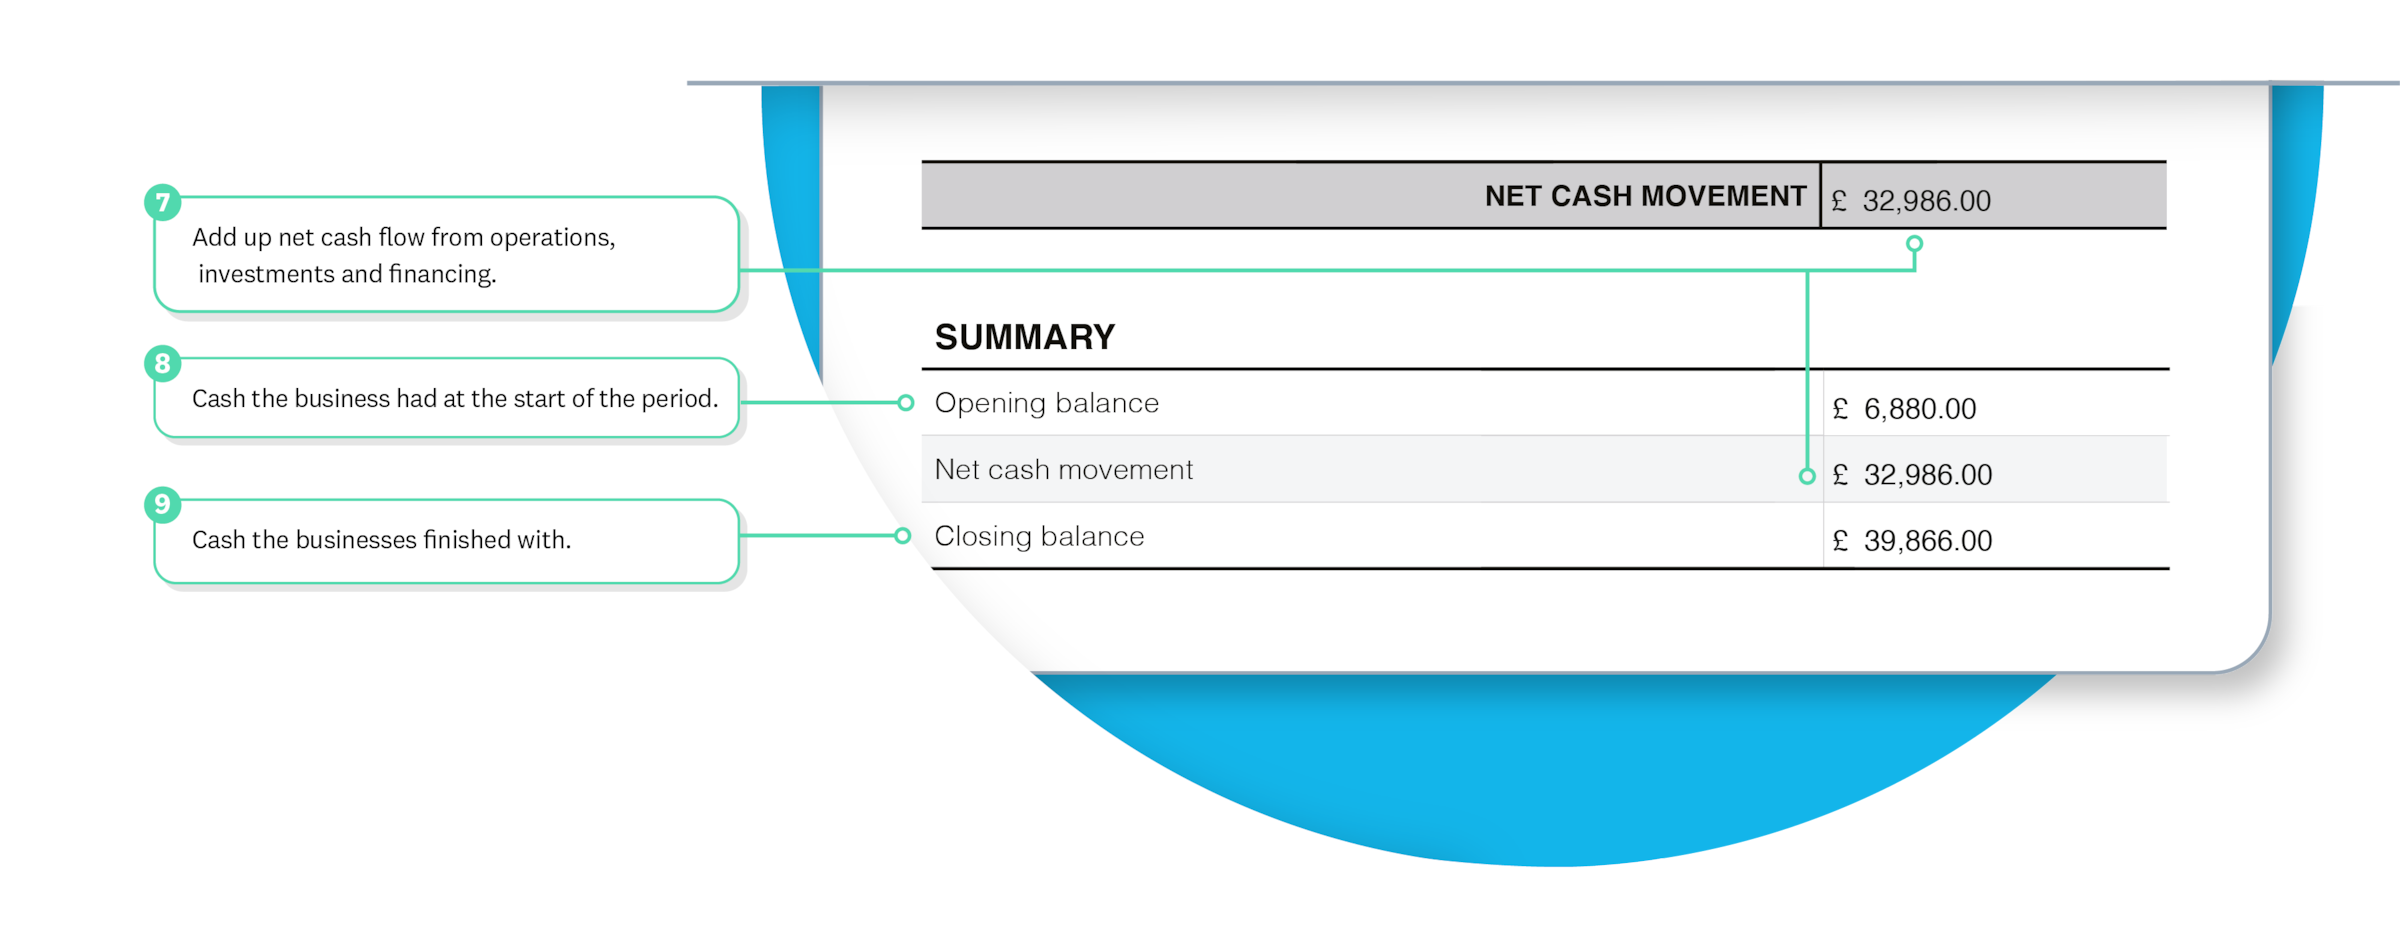 Net cash movement adds cash flow from operations, investments and financing.